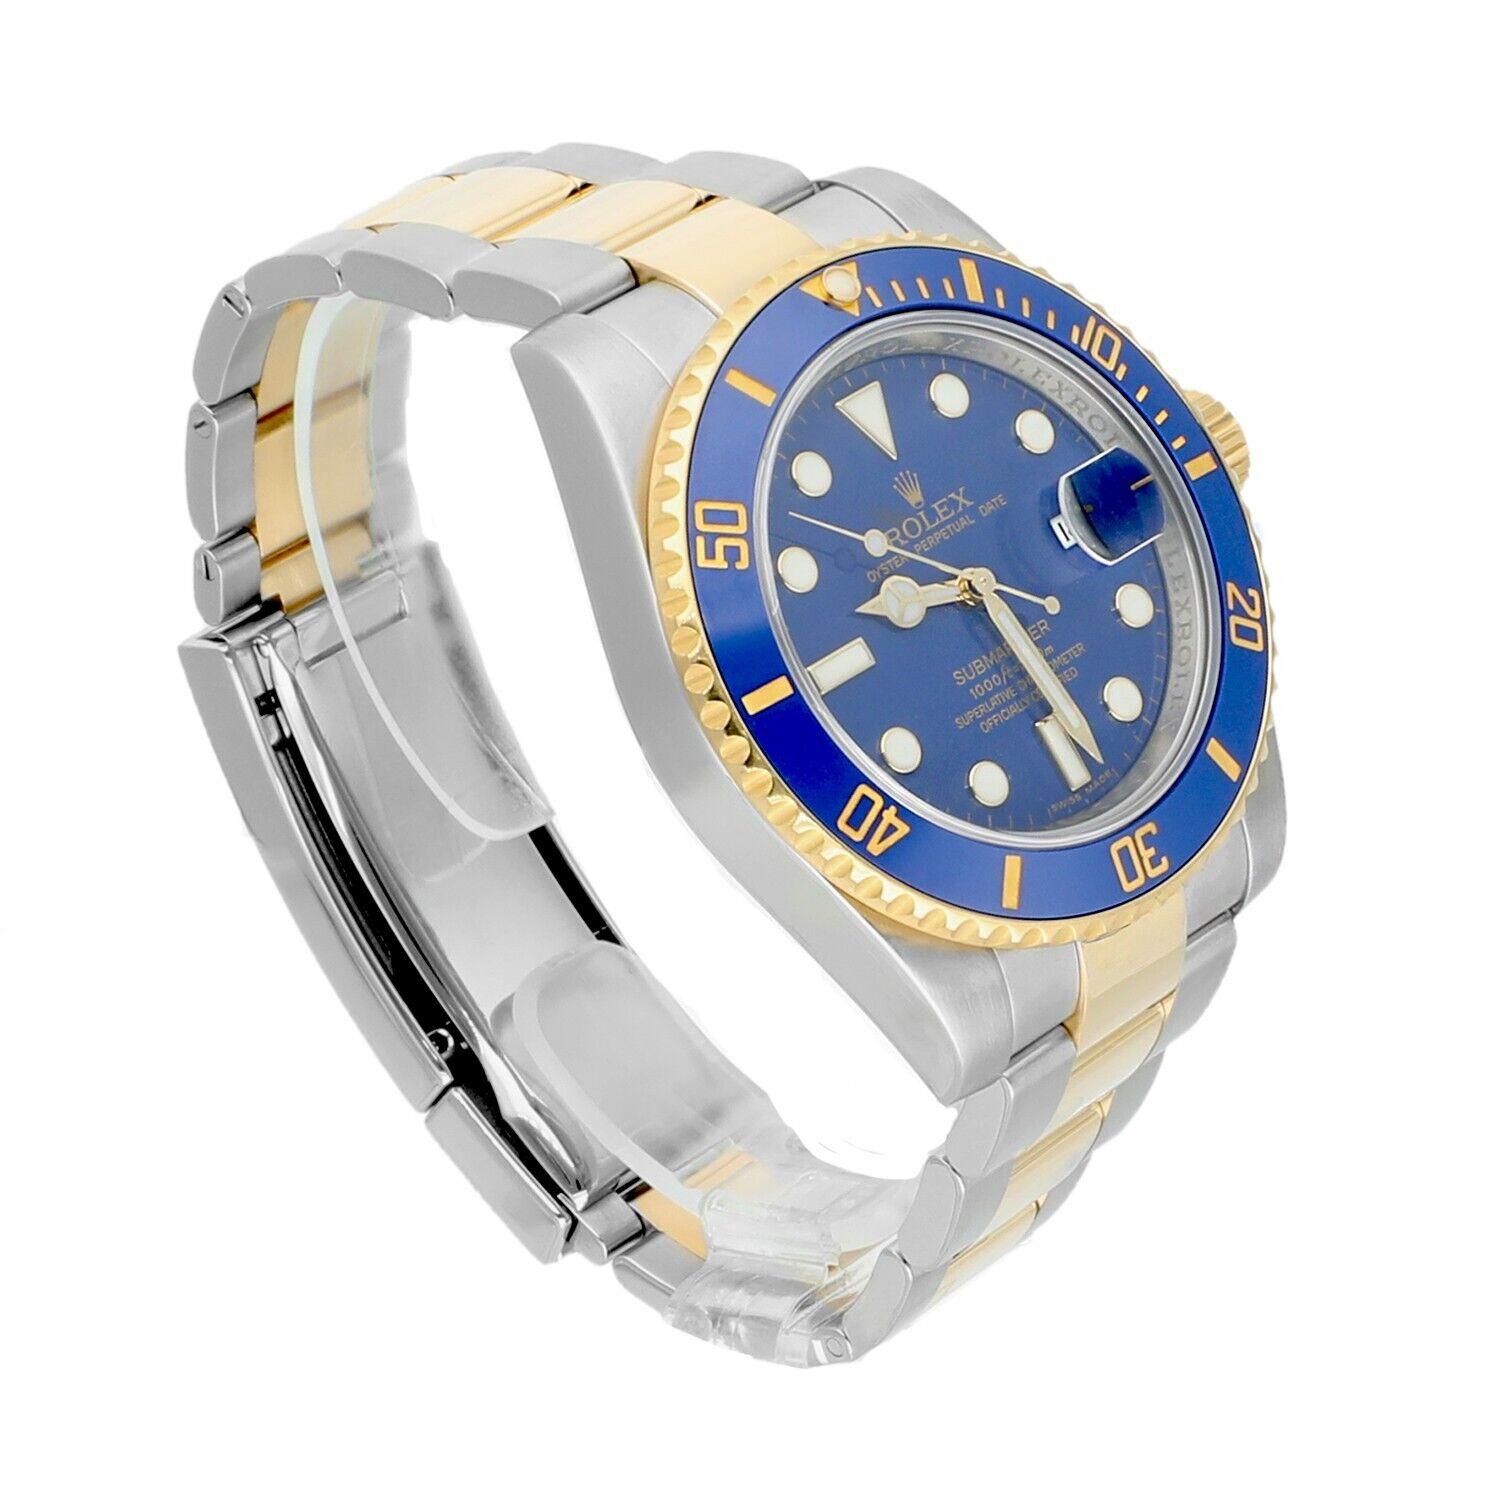 Rolex Submariner Date 116613LB Ceramic Bezel Yellow Gold/Stainless Steel Watch For Sale 2